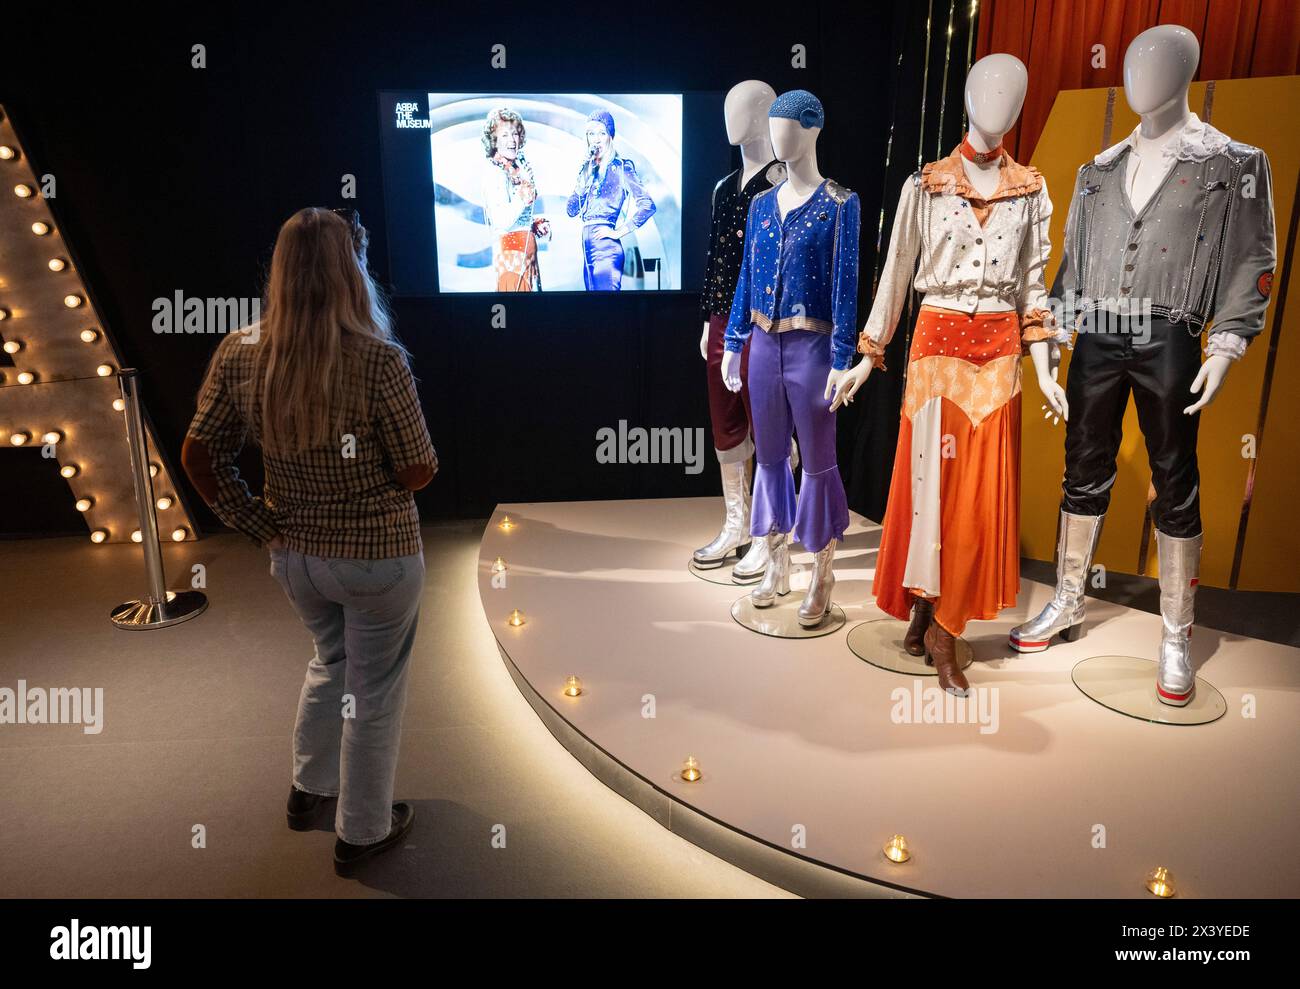 Malmo, Sweden April 29, 2024. ABBA member´s costumes from when they won the Eurovision Song Contest in Brighton 50 years ago are on display when Abba World mini-exhibition and pop-up experience opened its doors in central Malmo, Sweden April 29, 2024. The ABBA World pop-up is open during the two weeks that the Eurovision Song Contest will be in town.Photo: Johan Nilsson/TT/Code 50090 Credit: TT News Agency/Alamy Live News Stock Photo